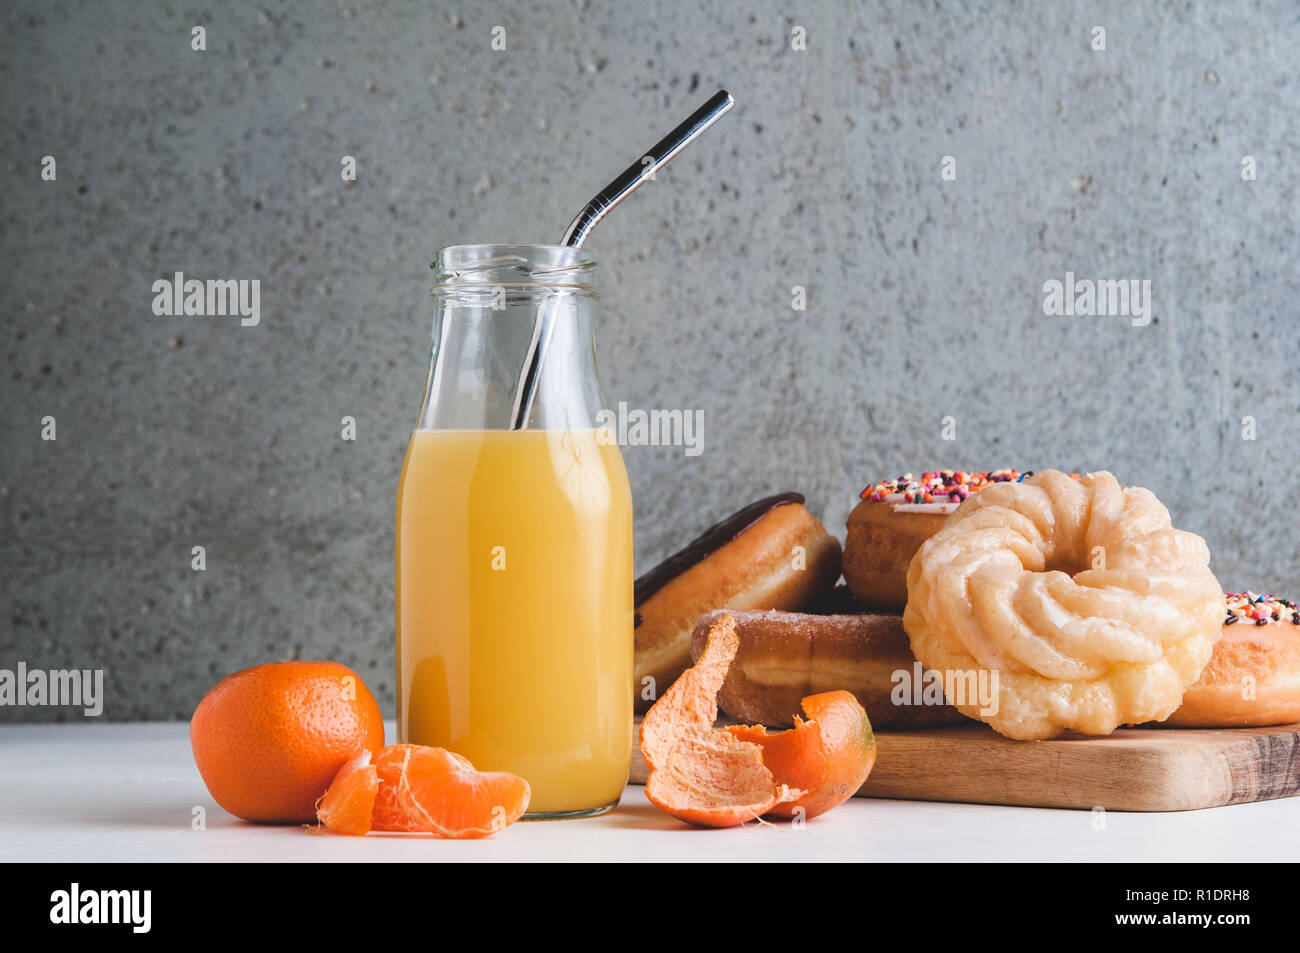 orange juice in a bottle and a platter of donuts Stock Photo